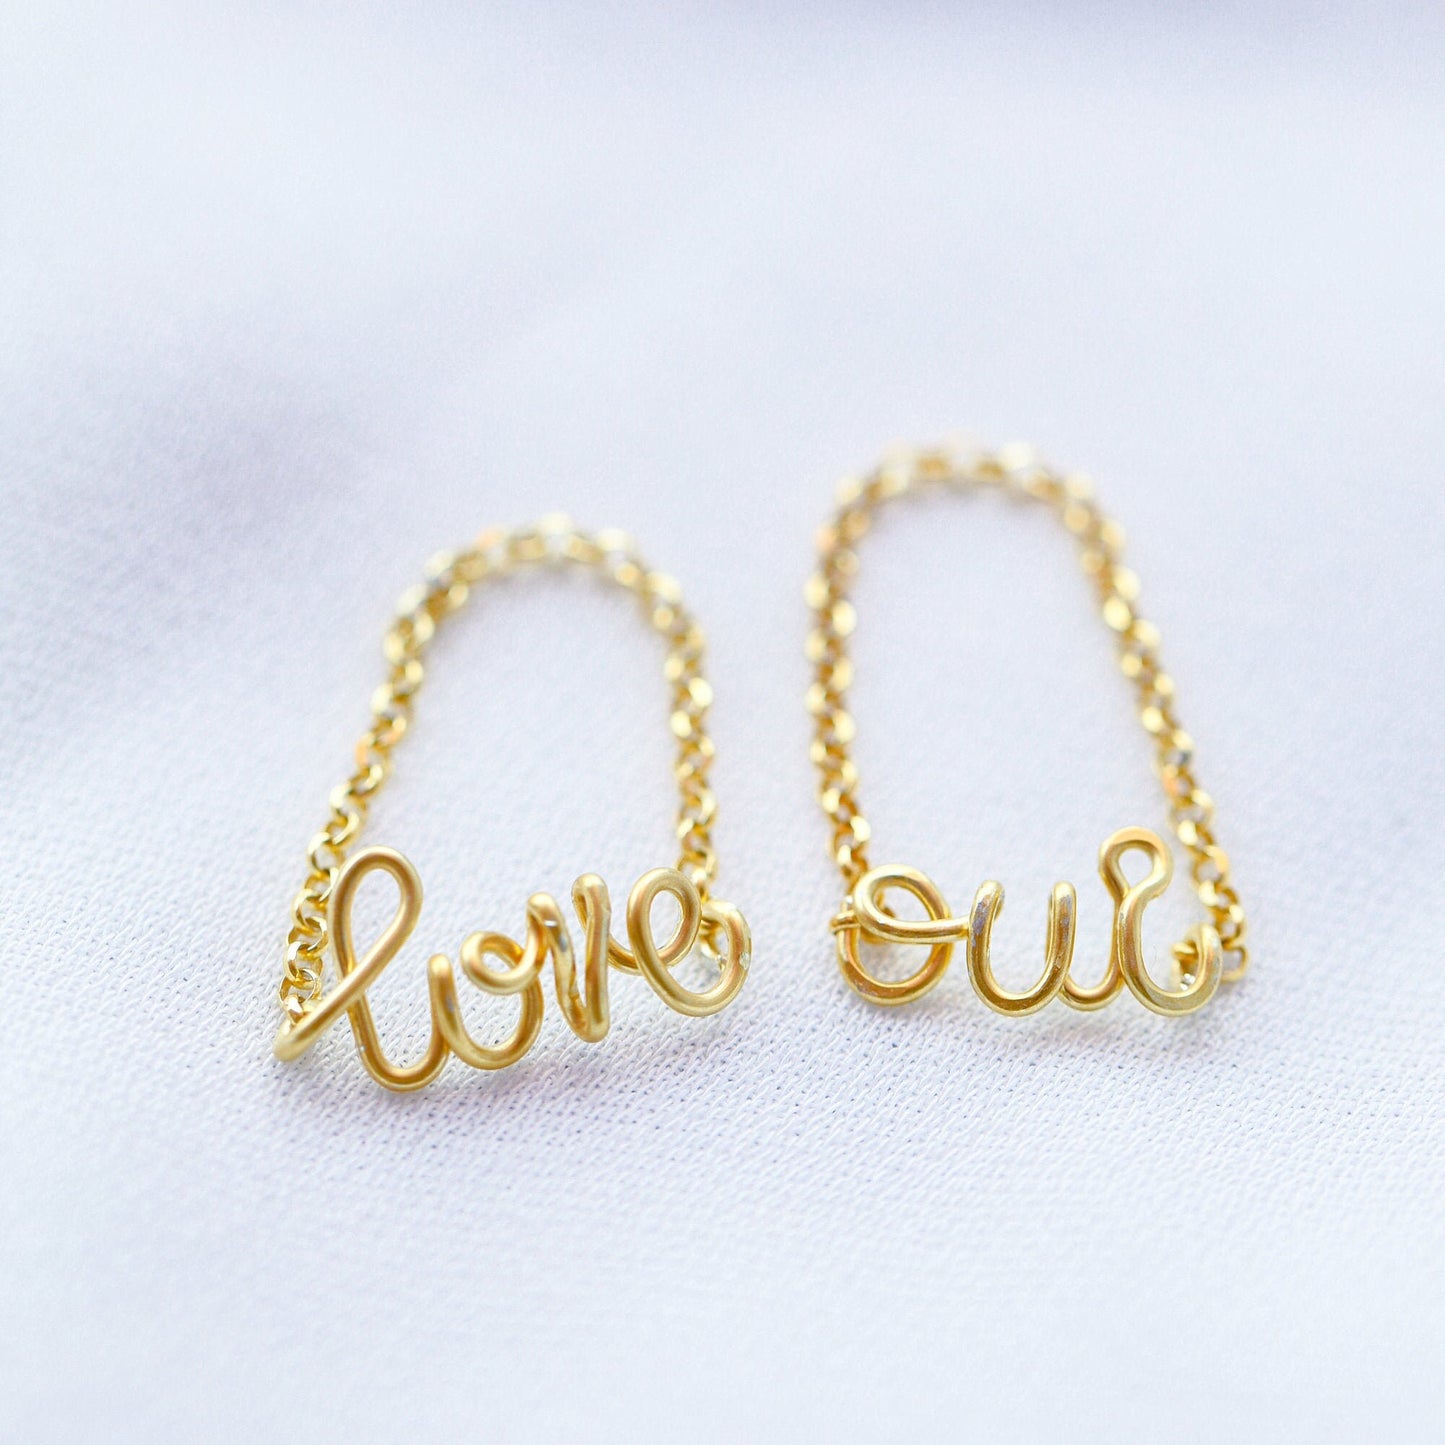 Personalized Name Ring Cursive Letter Name Ring Custom Ring Minimalist Gold Chain Ring Love Ring Oui Ring Gift For Mom Best Friend Gift